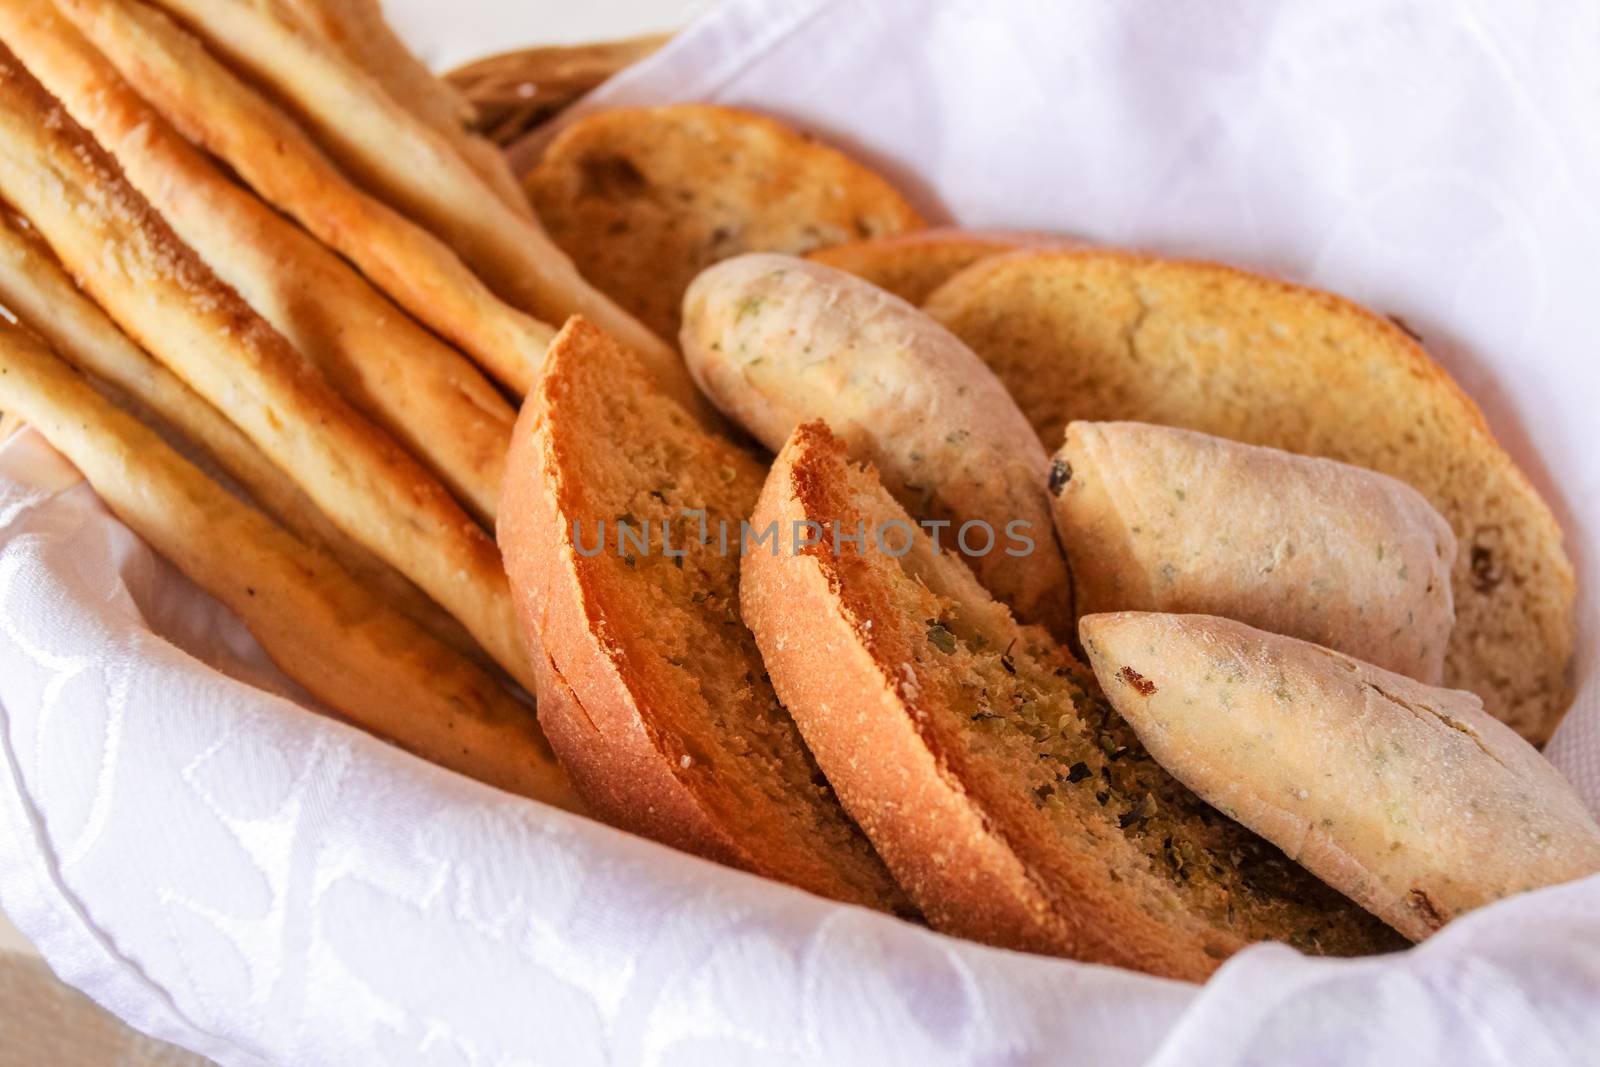 freshly backed various bread, tost, bagettes, served in a basket with white napkin.